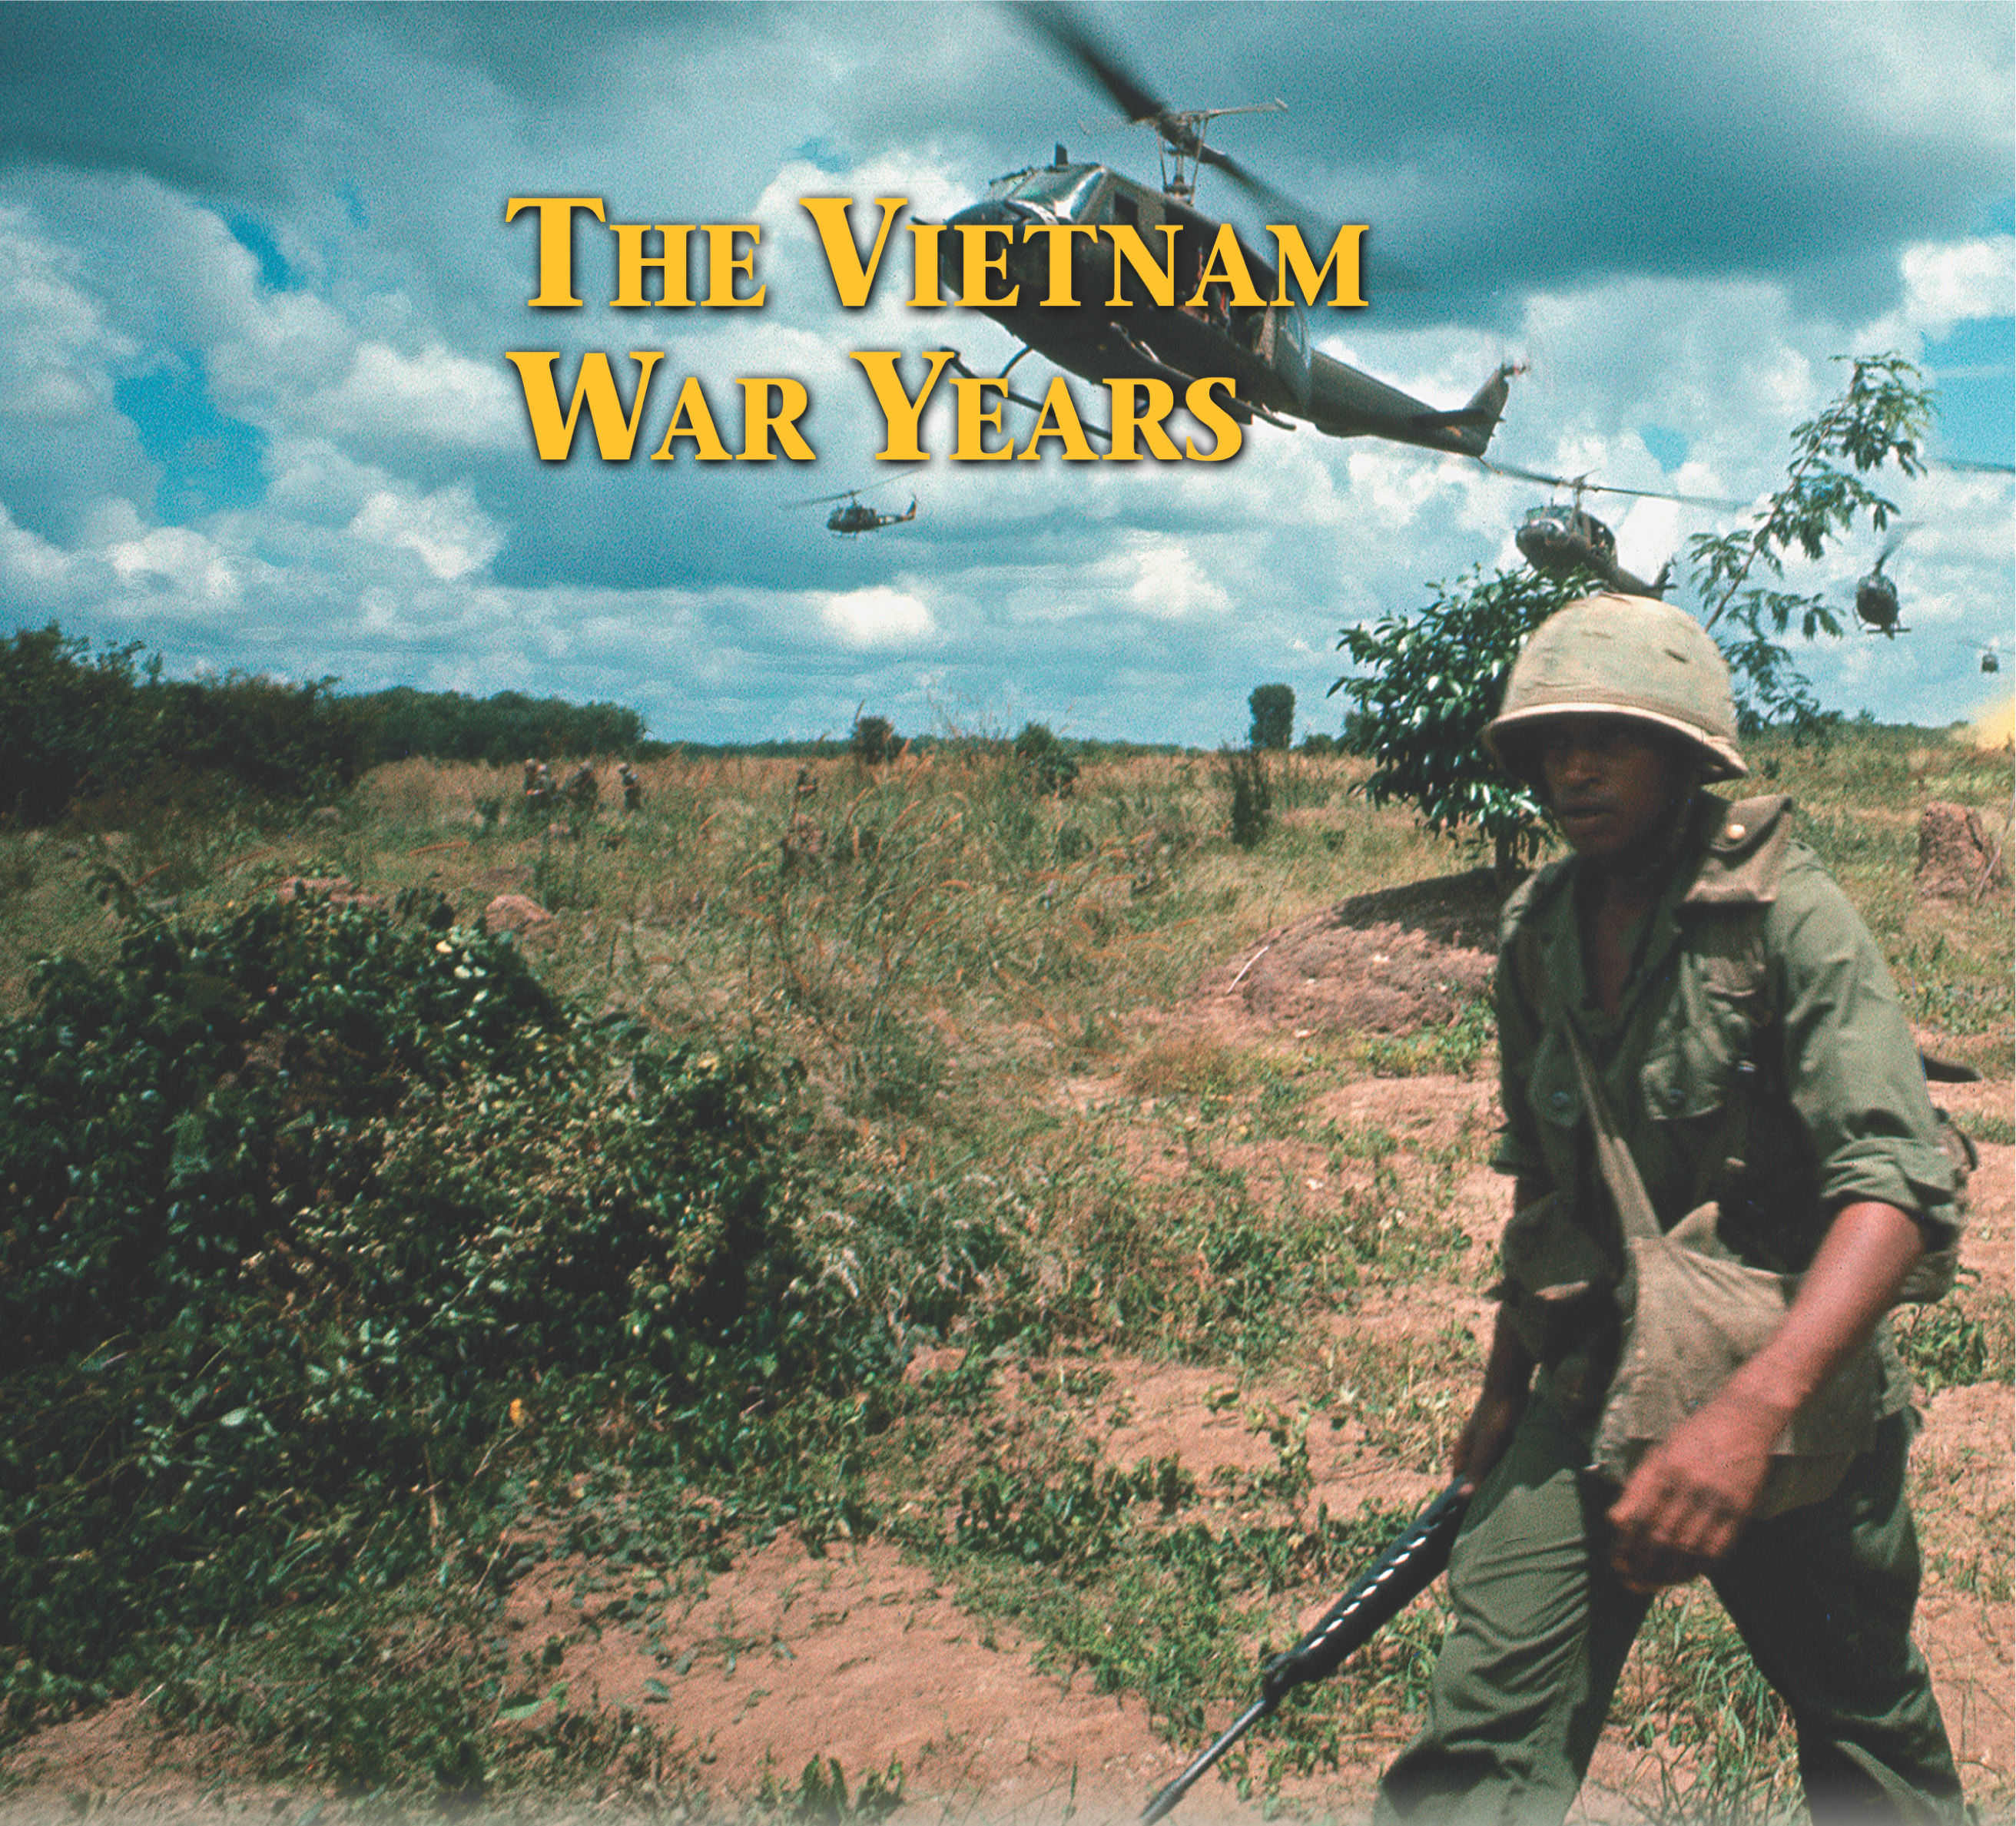 photo: soldiers walk across a field, while helicopters fly low overhead. A title: The Vietnam War Years.